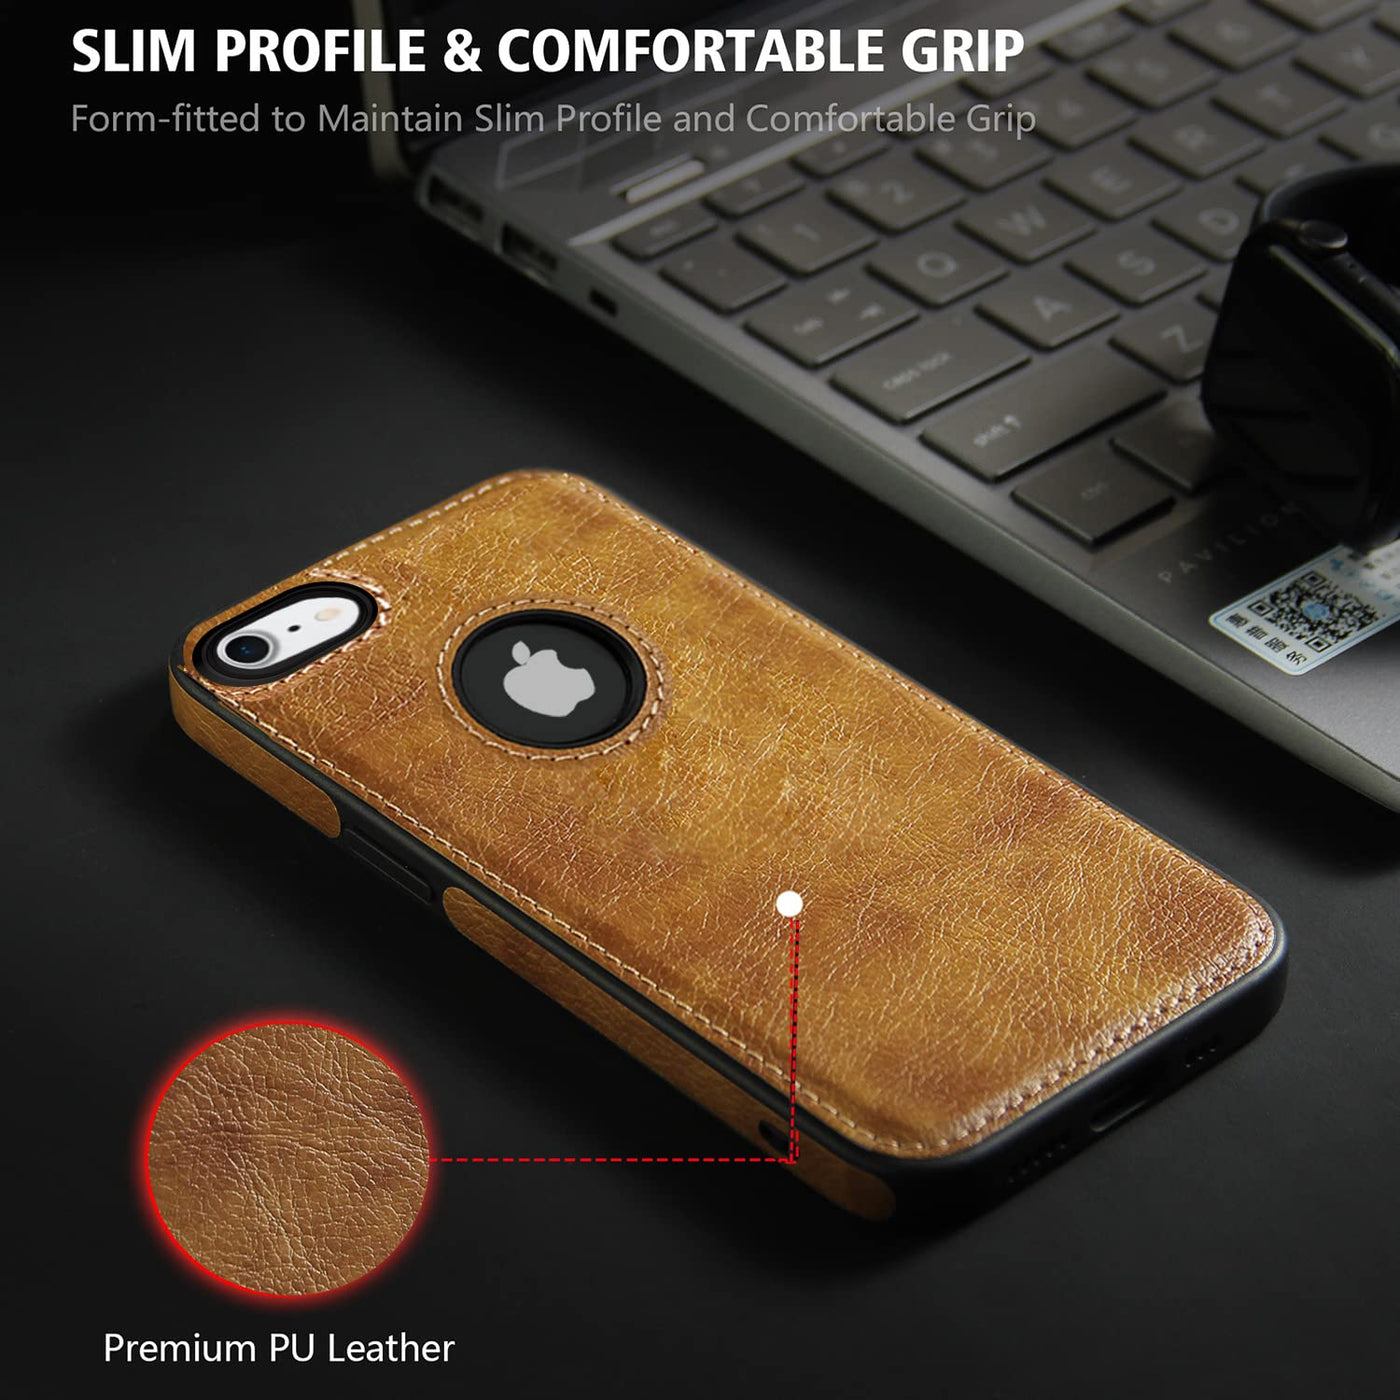 Excelsior Premium PU Leather Back Cover case For Apple iPhone 6 | iPhone 6s